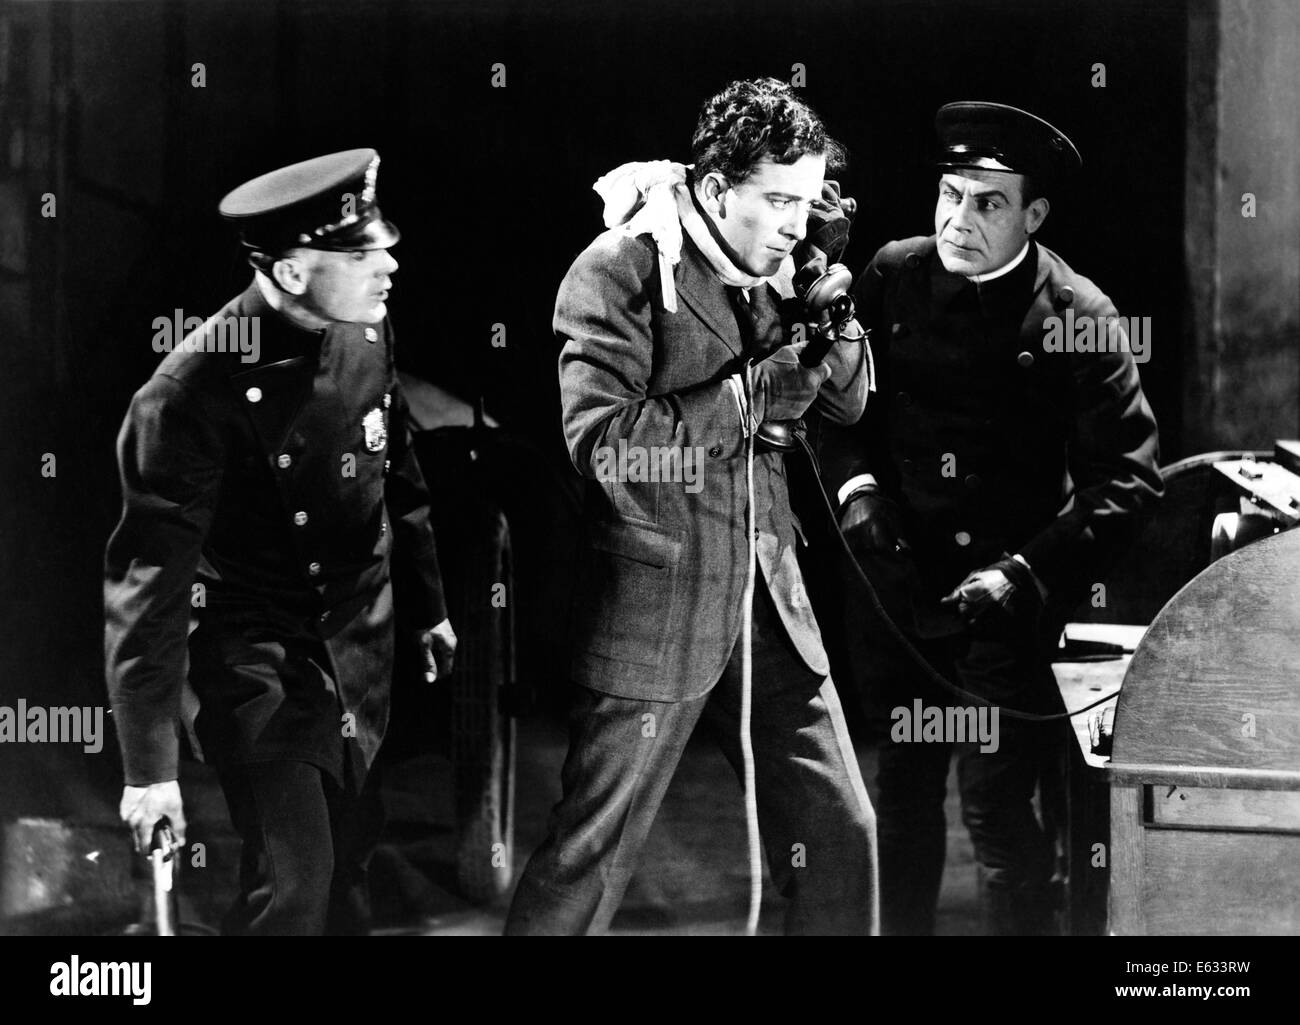 1930s TWO ARMED POLICE LOOKING AT ANXIOUS DESPERATE MAN ROBBERY VICTIM TALKING ON TELEPHONE Stock Photo